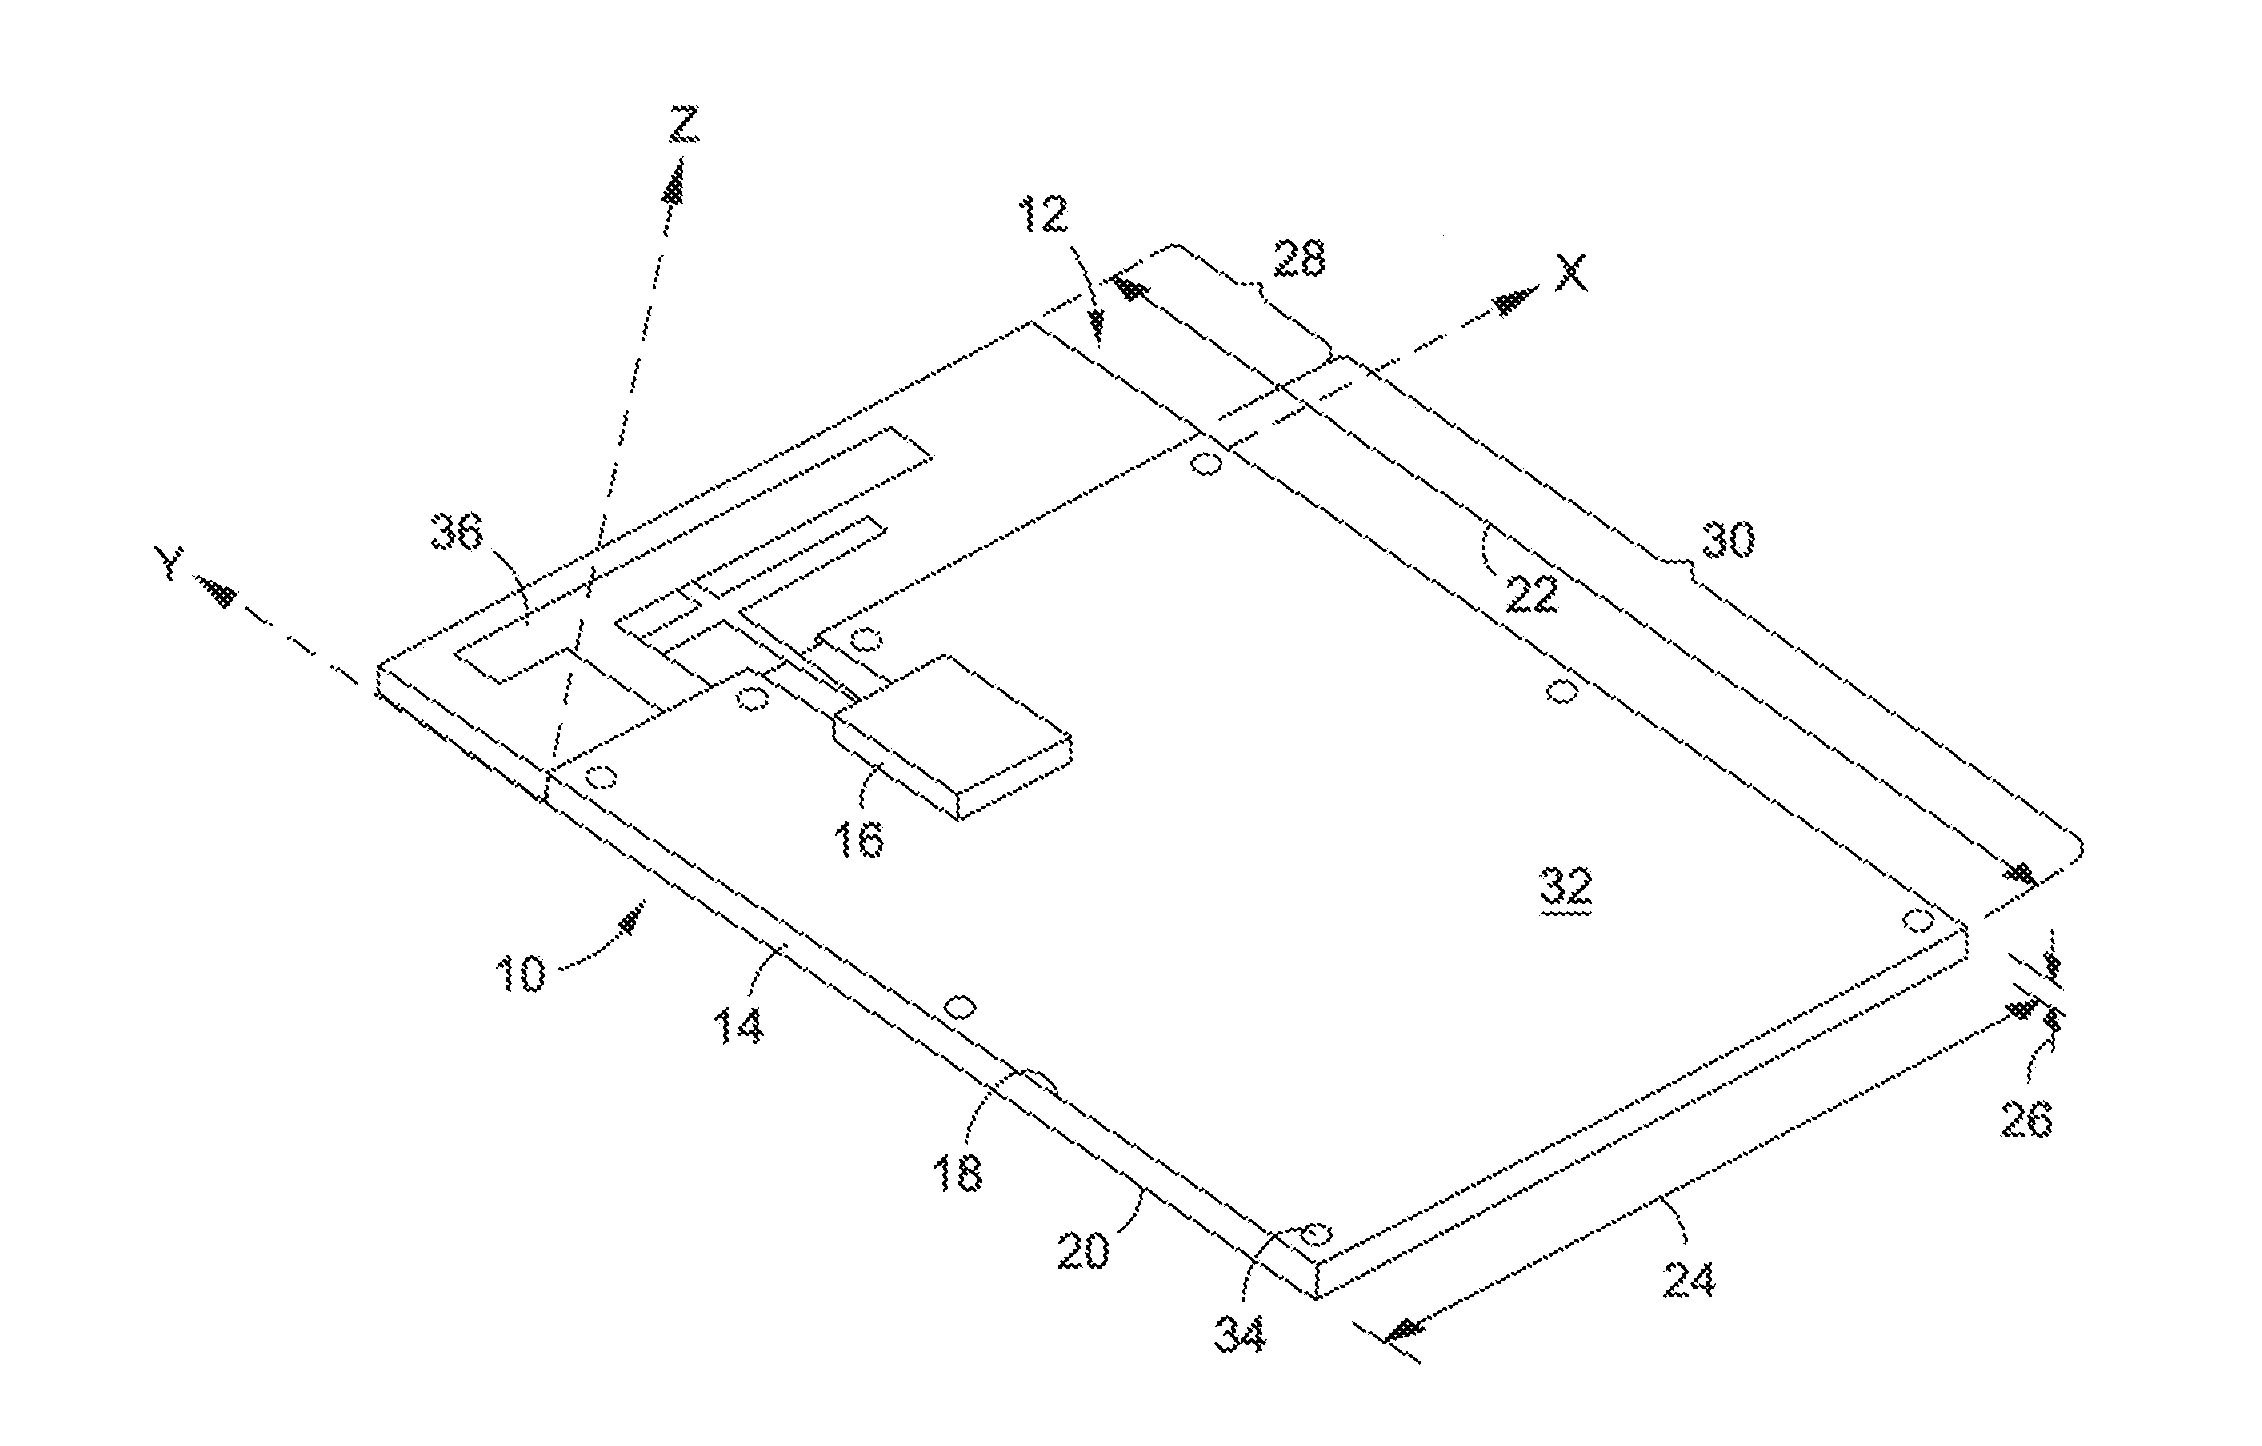 Wideband printed circuit board-printed antenna for radio frequency front end circuit